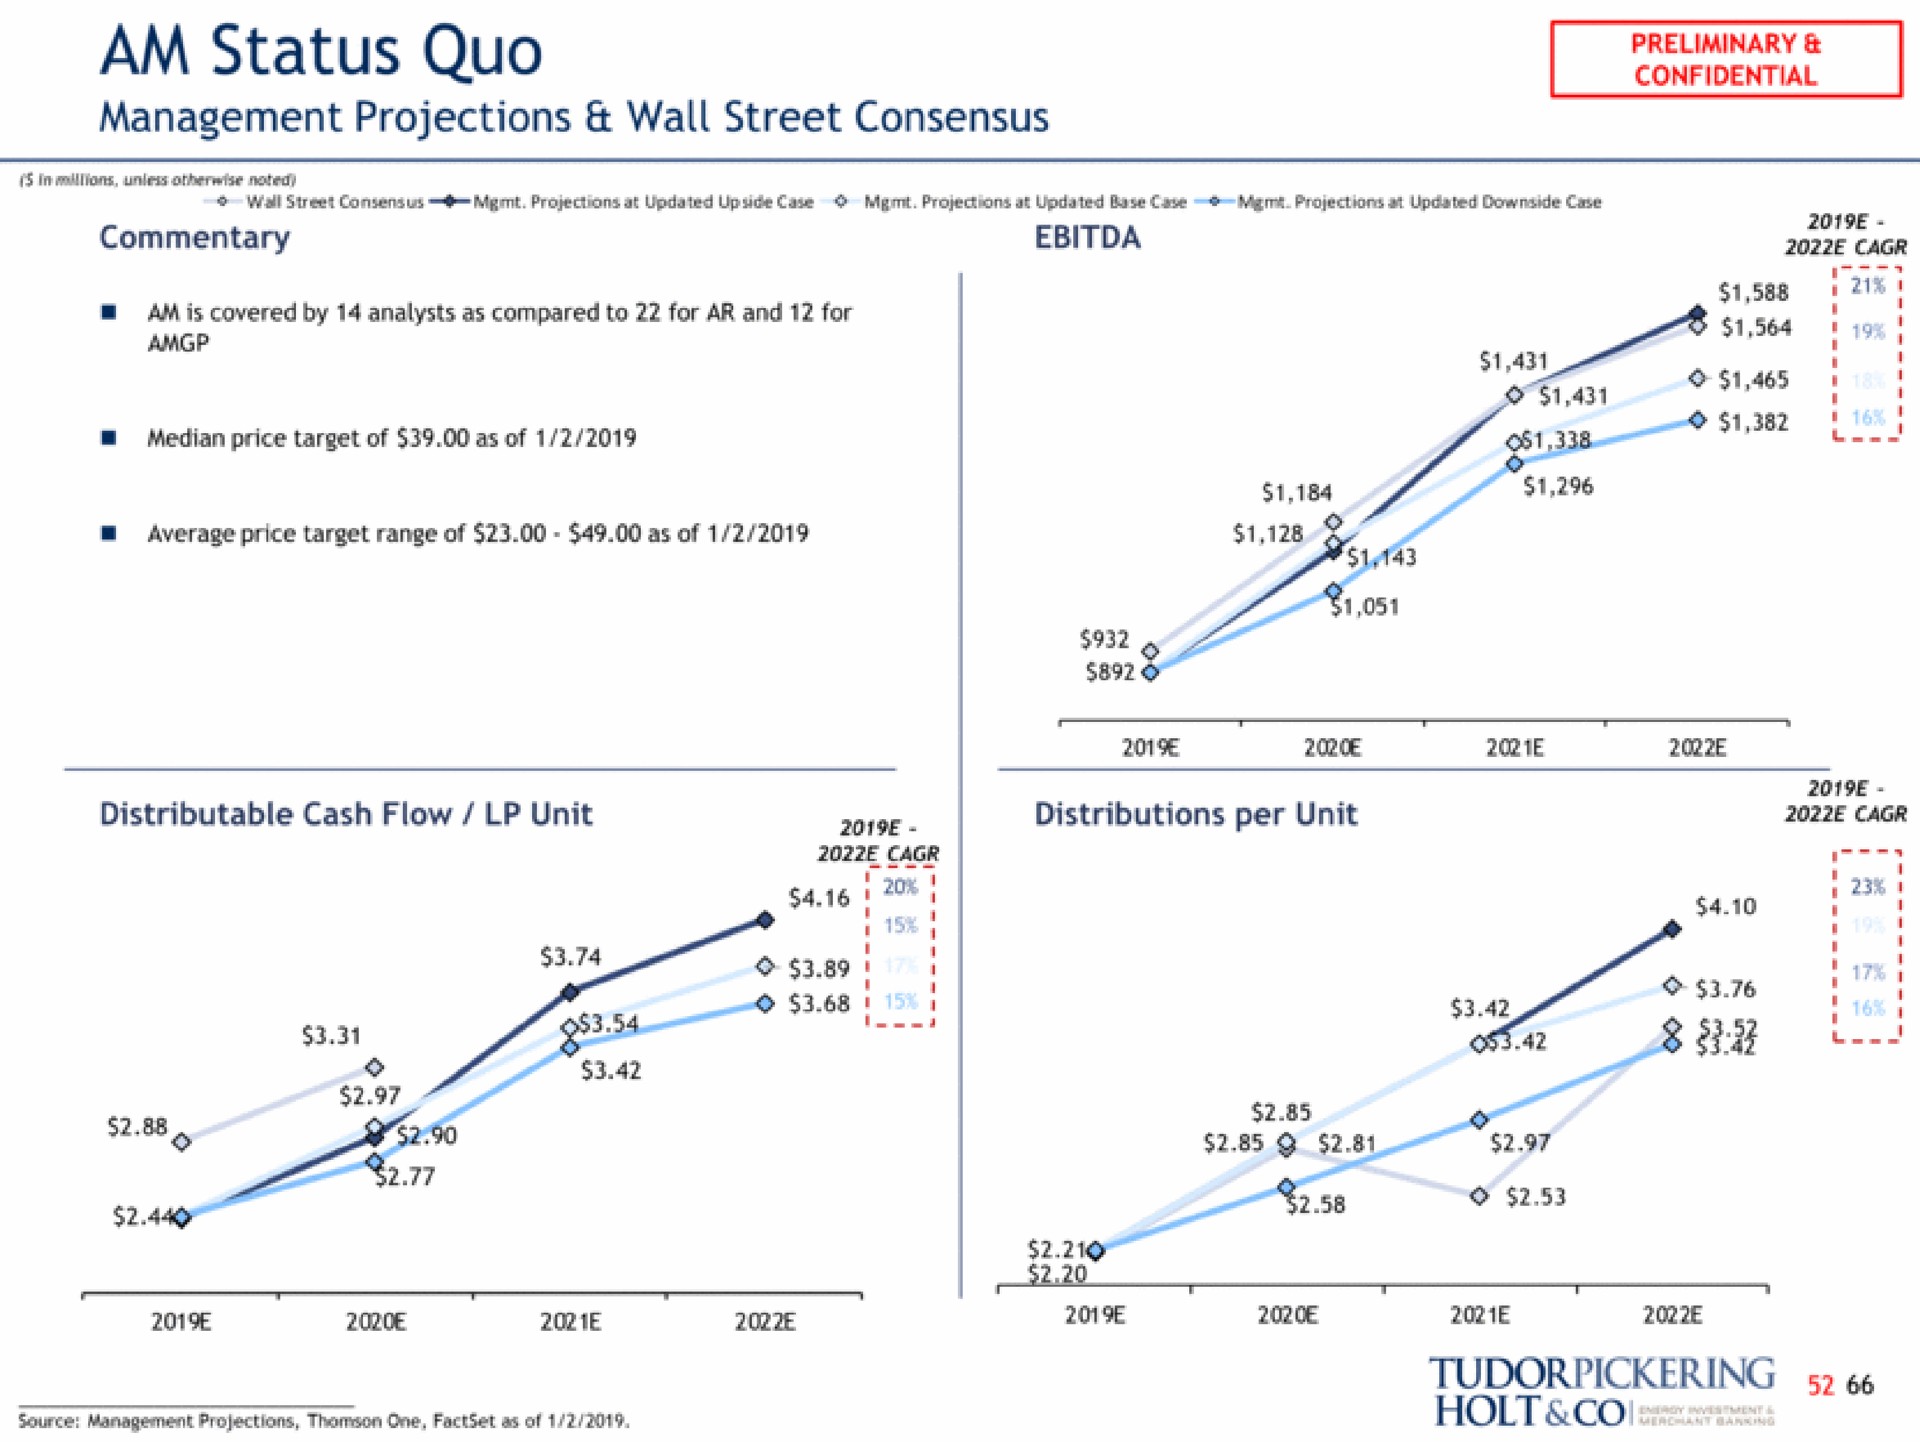 am status quo management projections wall street consensus a | Tudor, Pickering, Holt & Co